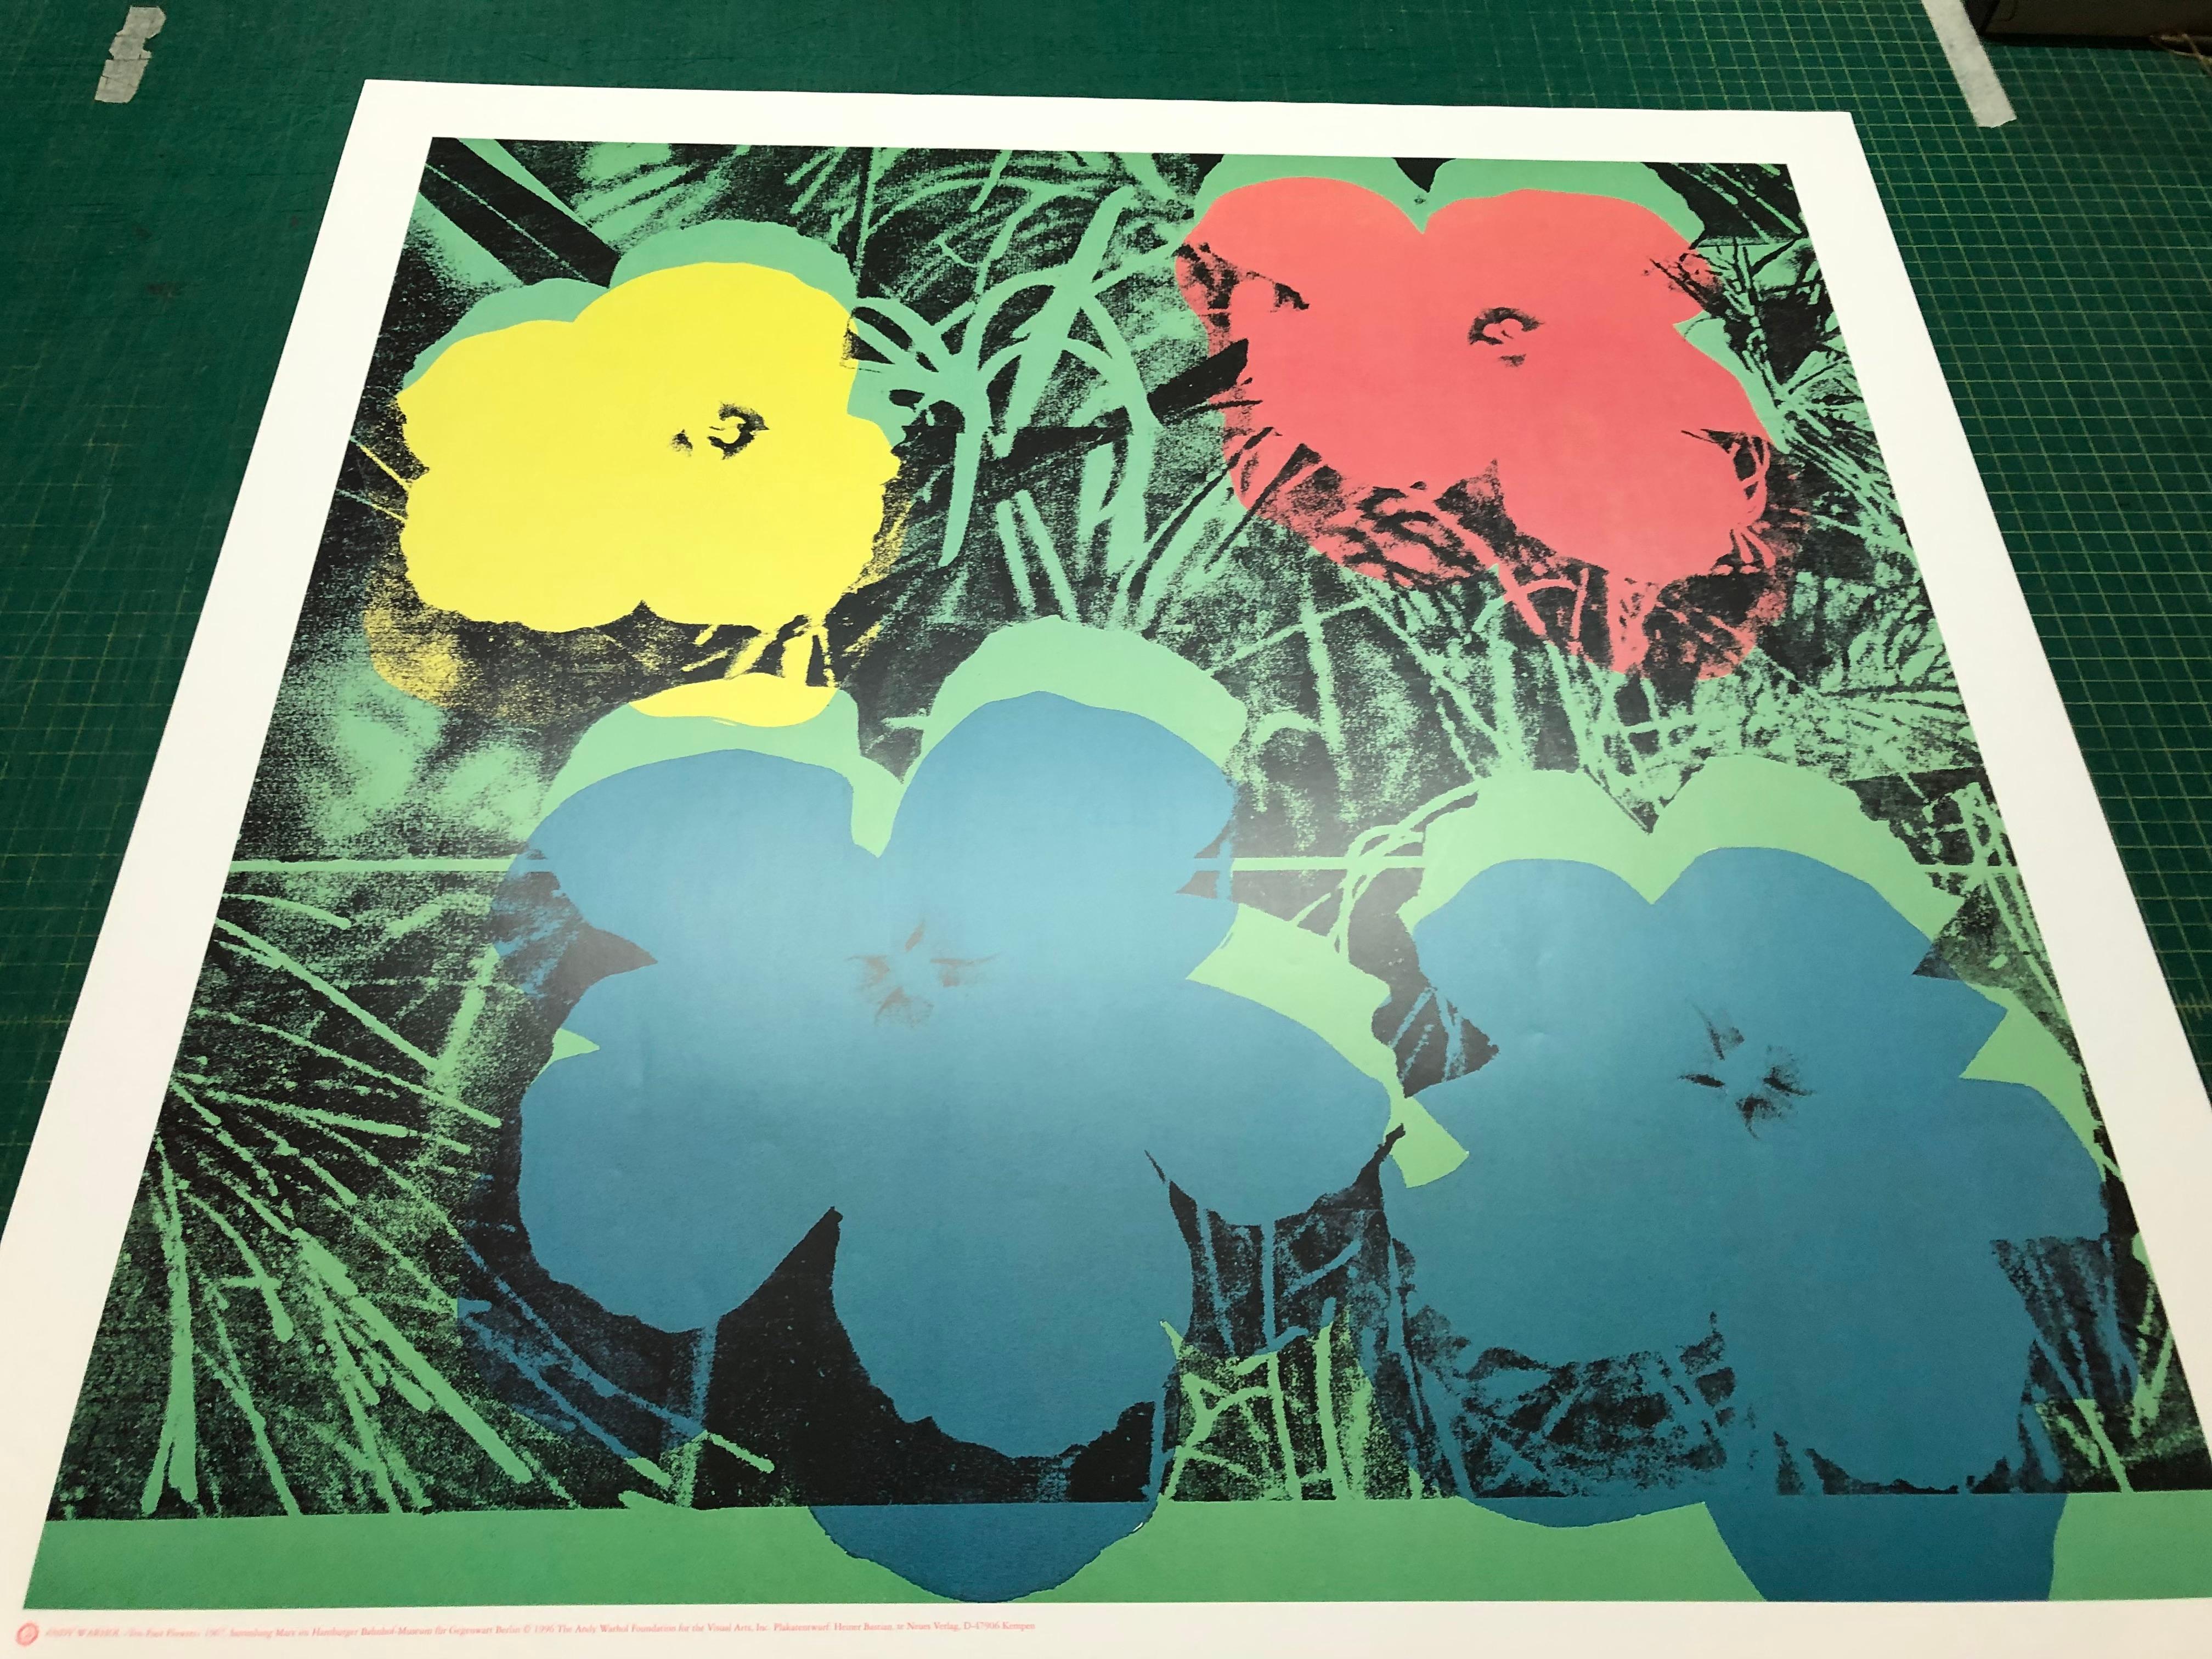 Paper Size: 36.5 x 36.5 inches ( 92.71 x 92.71 cm )
 Image Size: 29.5 x 29.5 inches ( 74.93 x 74.93 cm )
 Framed: No
 Condition: A: Mint
 
 Additional Details: Limited edition poster from Warhol's Ten Foot Flowers series. It is unsigned and not